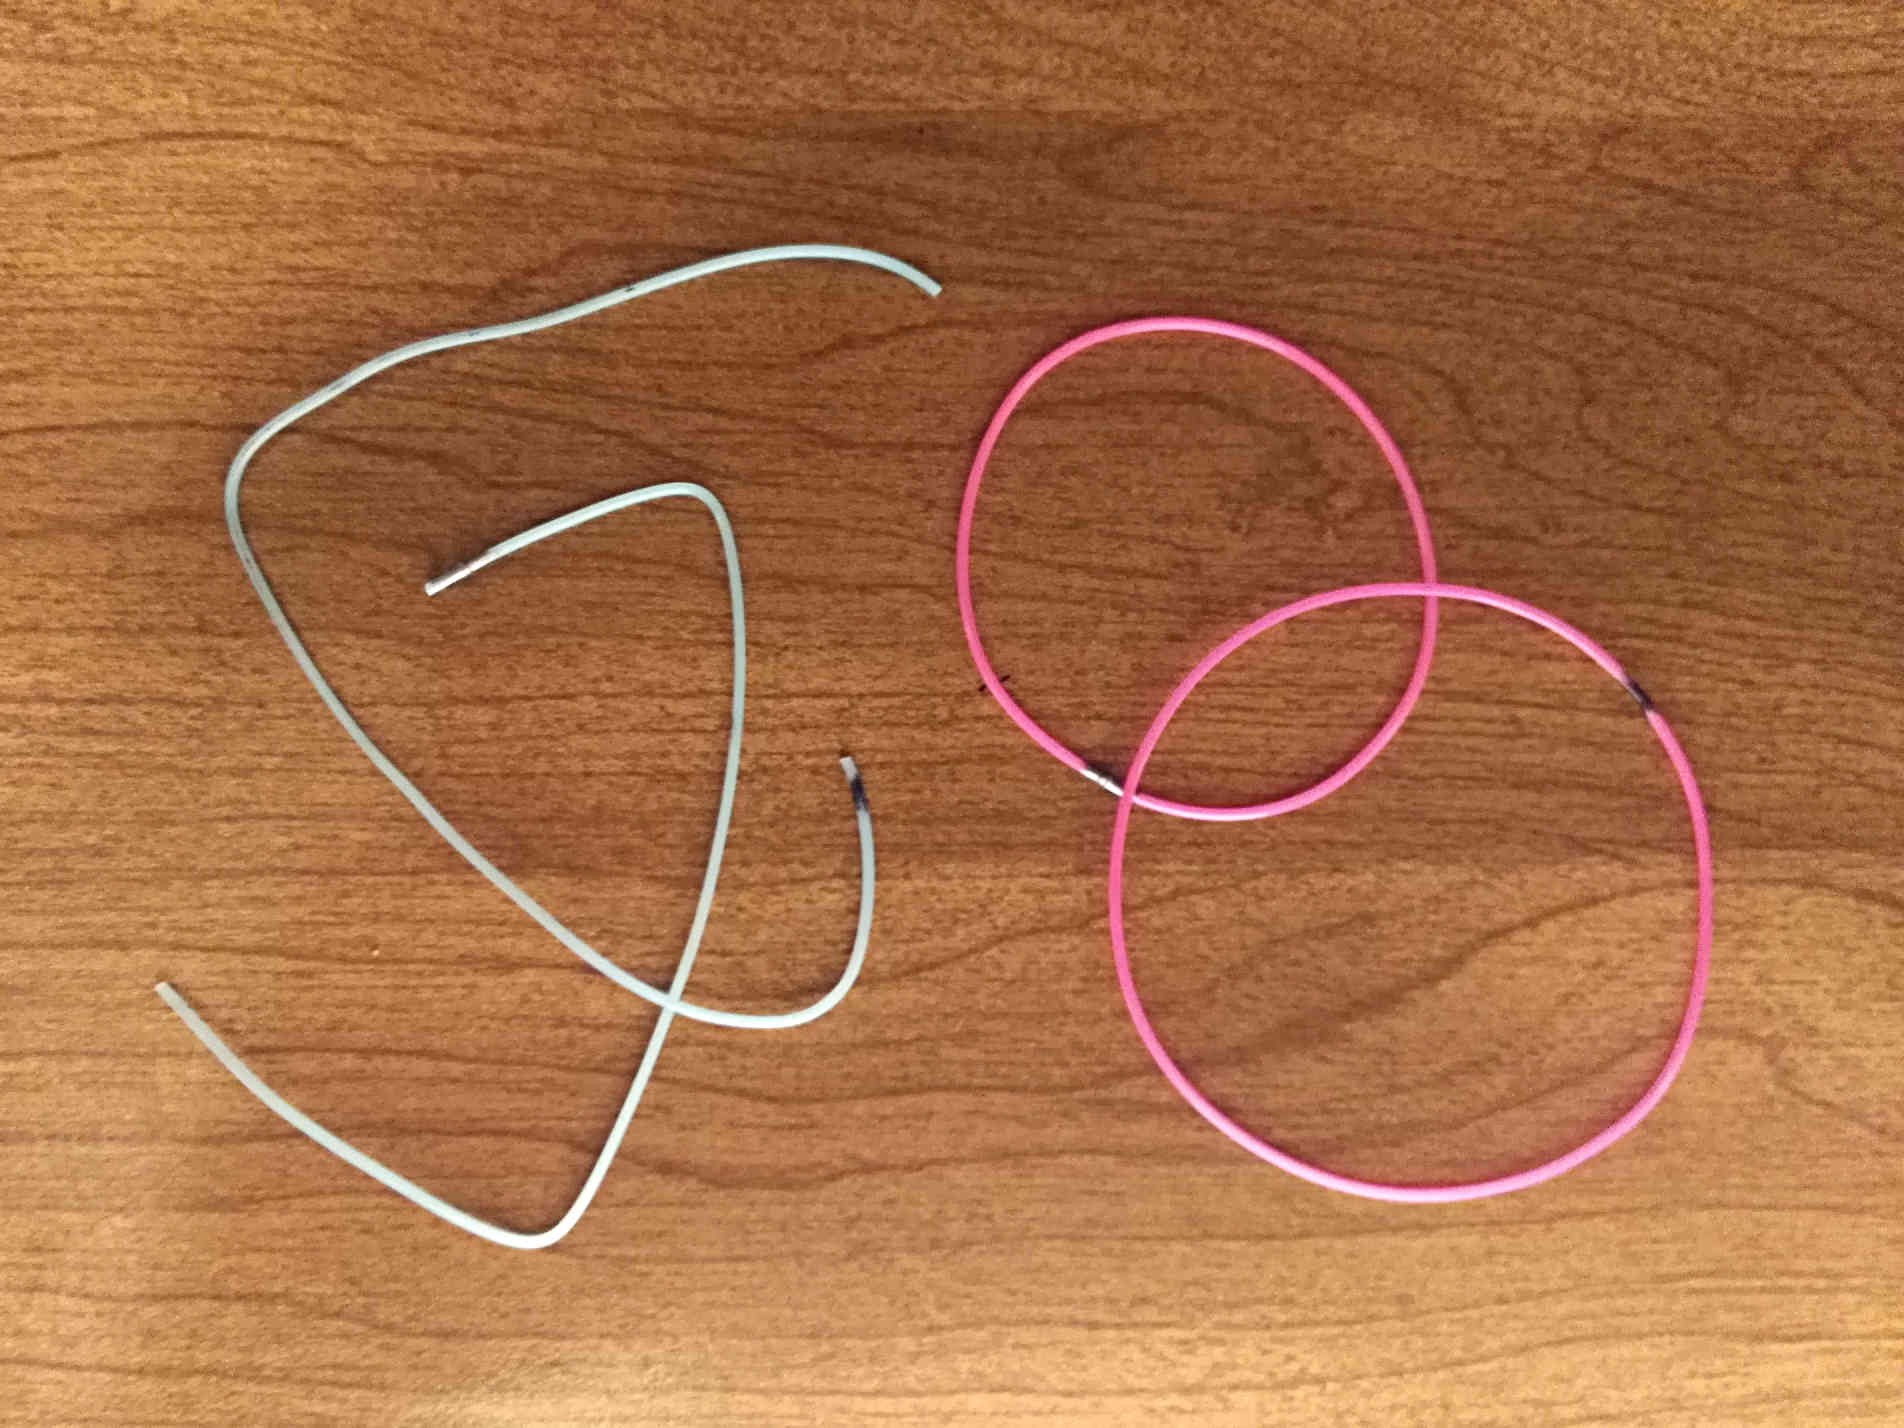 Deformed and boiled elastic cord